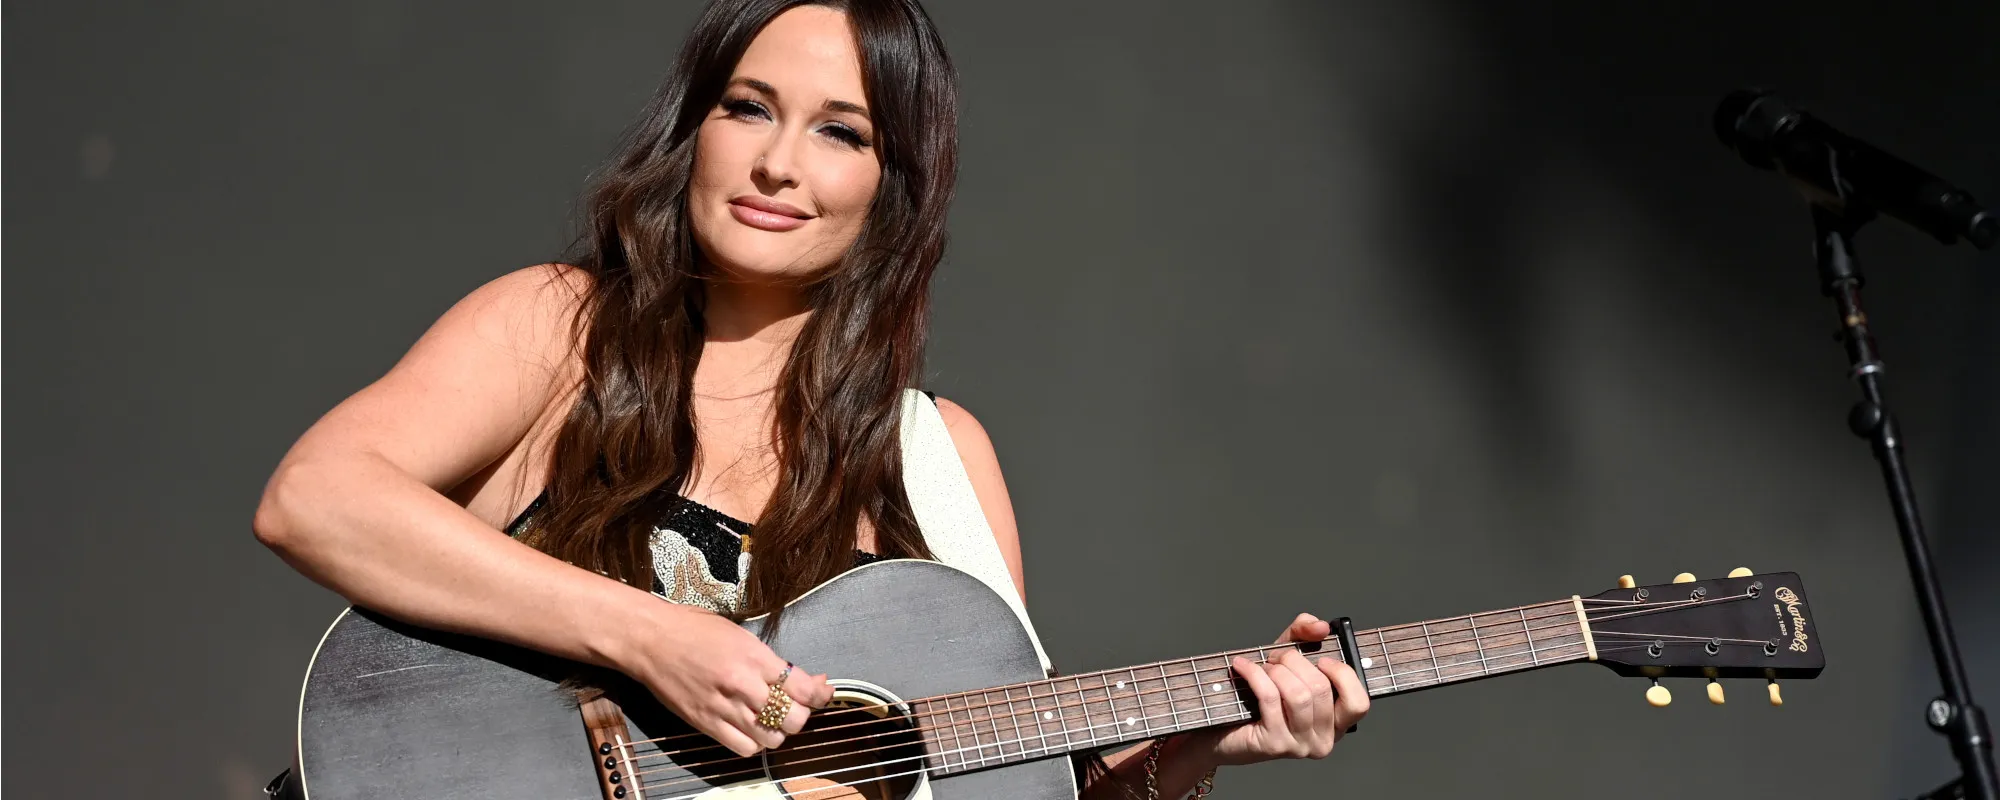 Kacey Musgraves Has Zero Guilt Over Her ‘Yellowstone’ Pleasure, Gushes Over Kevin Costner’s “Dutton Energy”